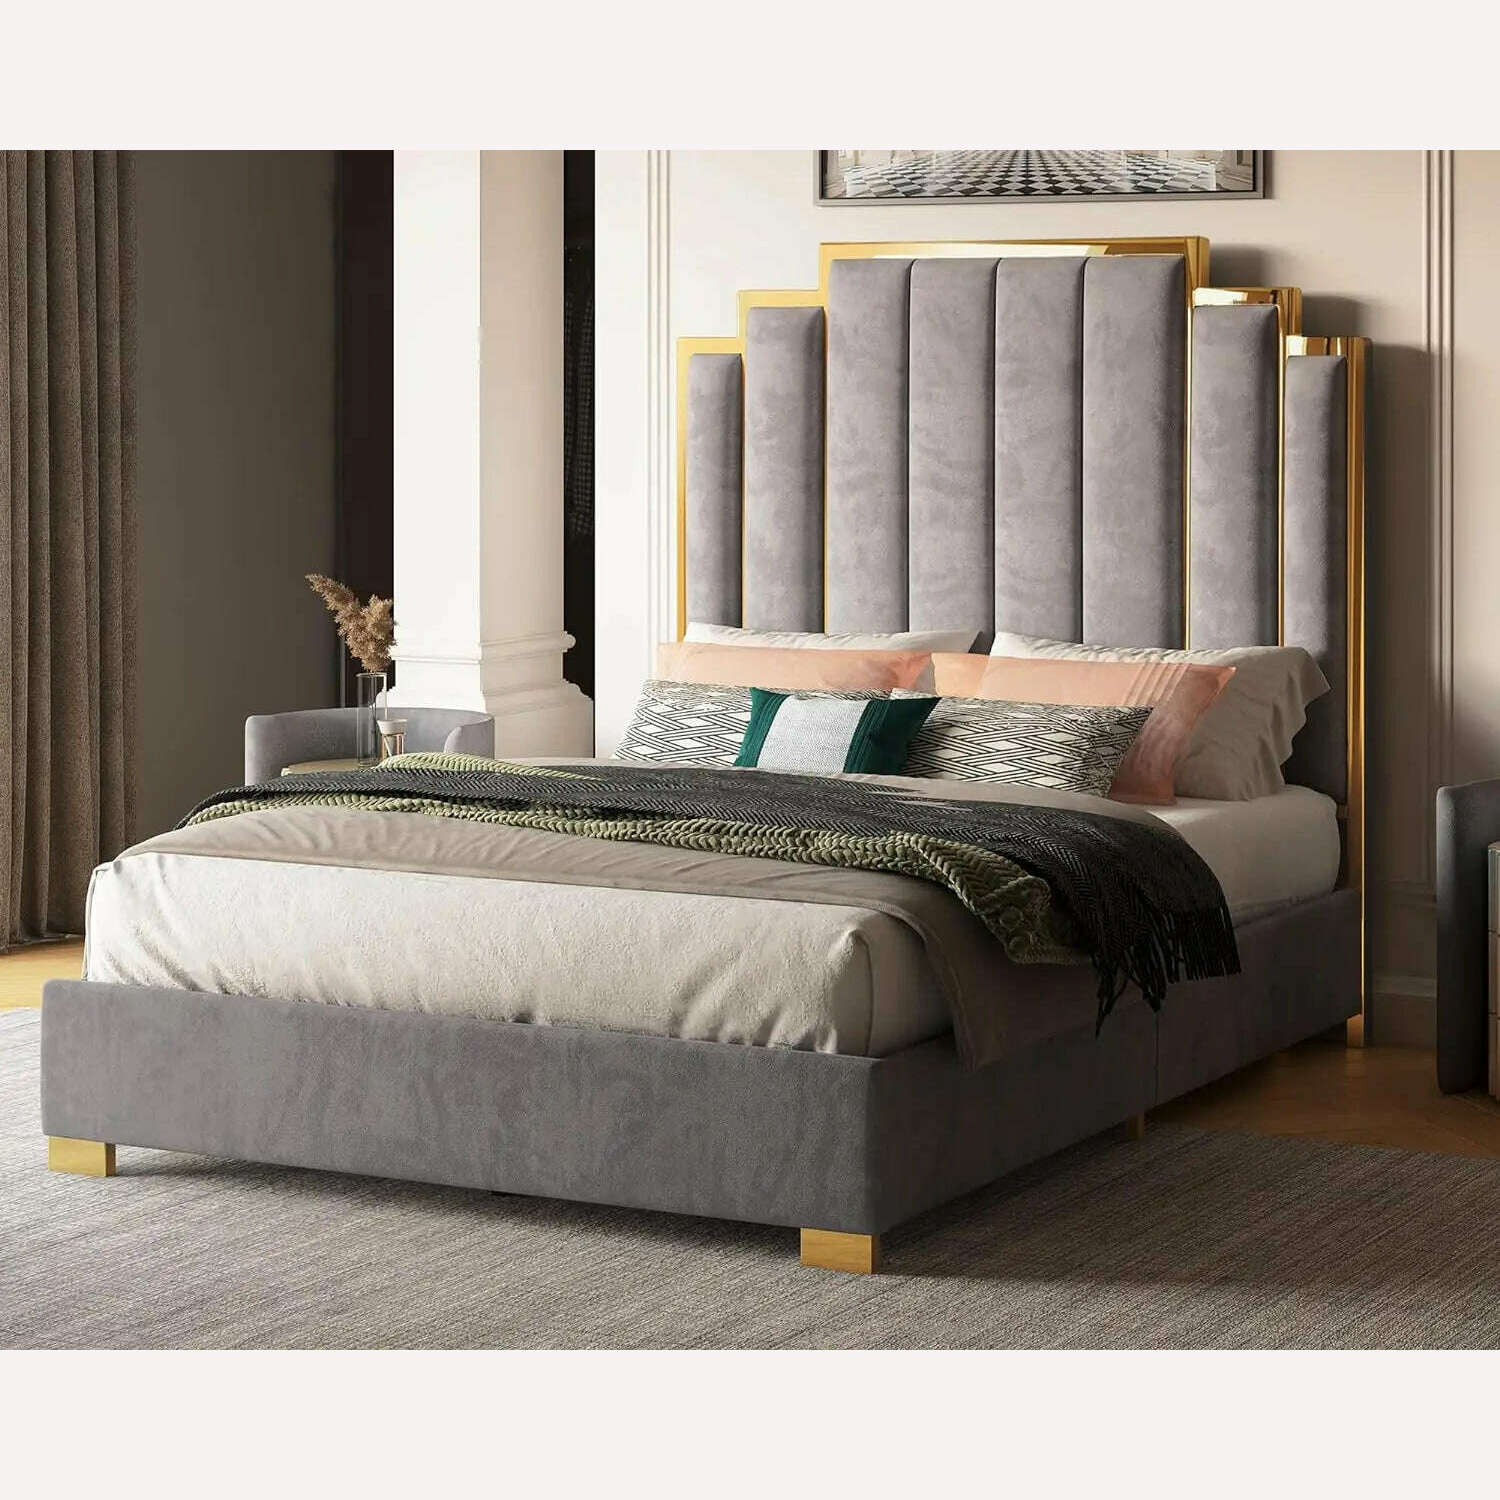 KIMLUD, Bed Frame, 61.4" Velvet Upholstered Bed with Gold Accent Headboard, Wood Slats, Queen Platform Bed, Grey / United States / King, KIMLUD Womens Clothes